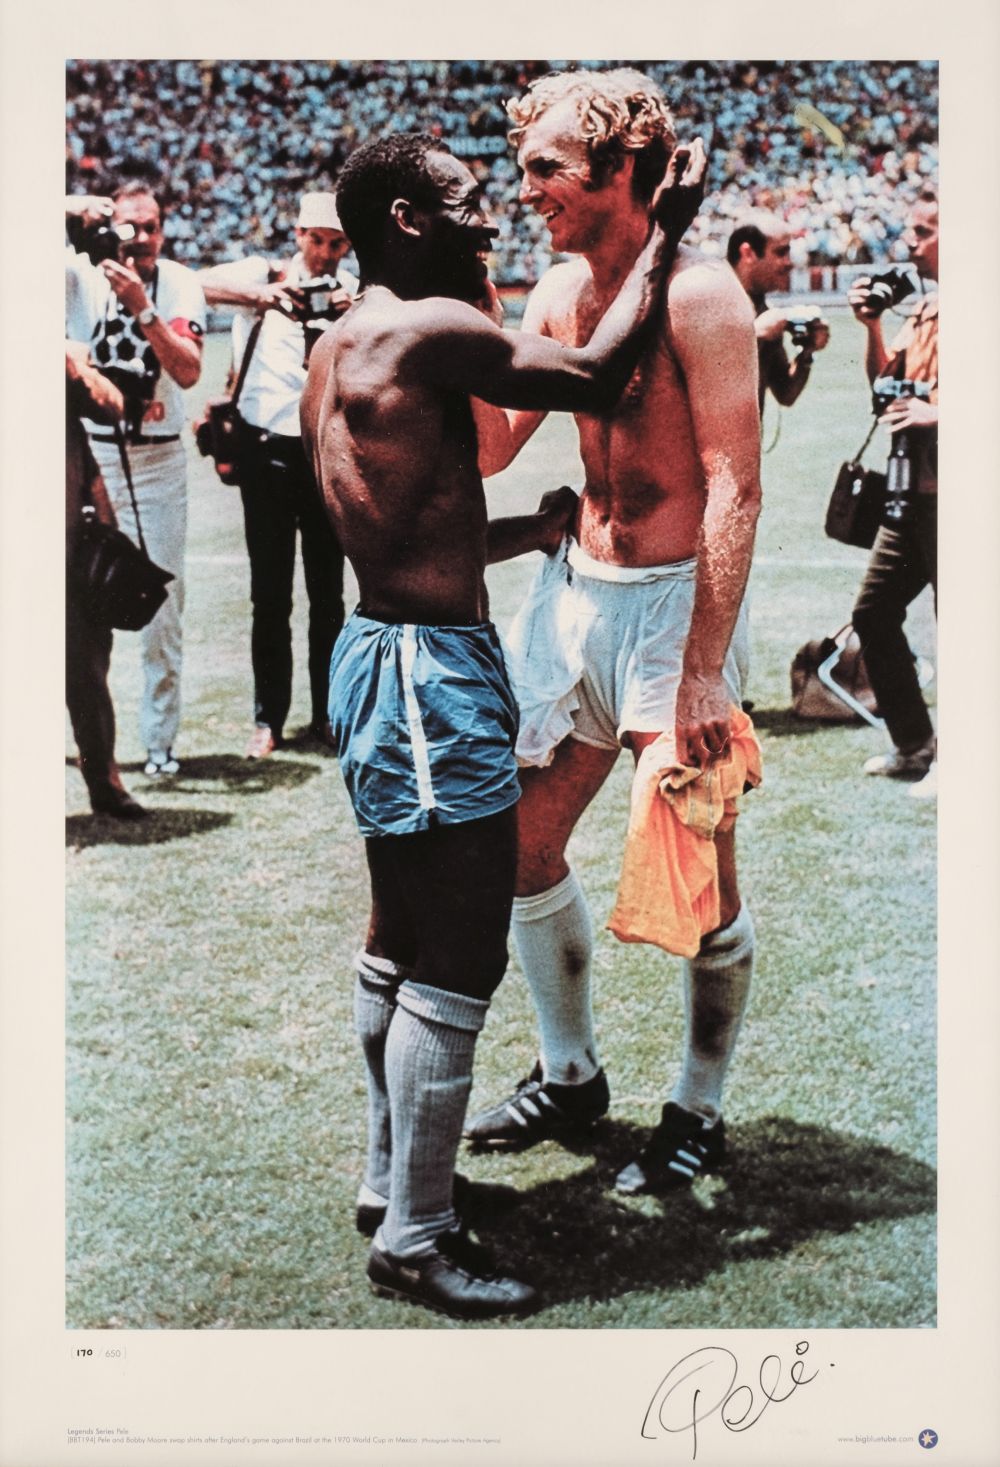 Football. A photographic limited edition print, signed by Pele